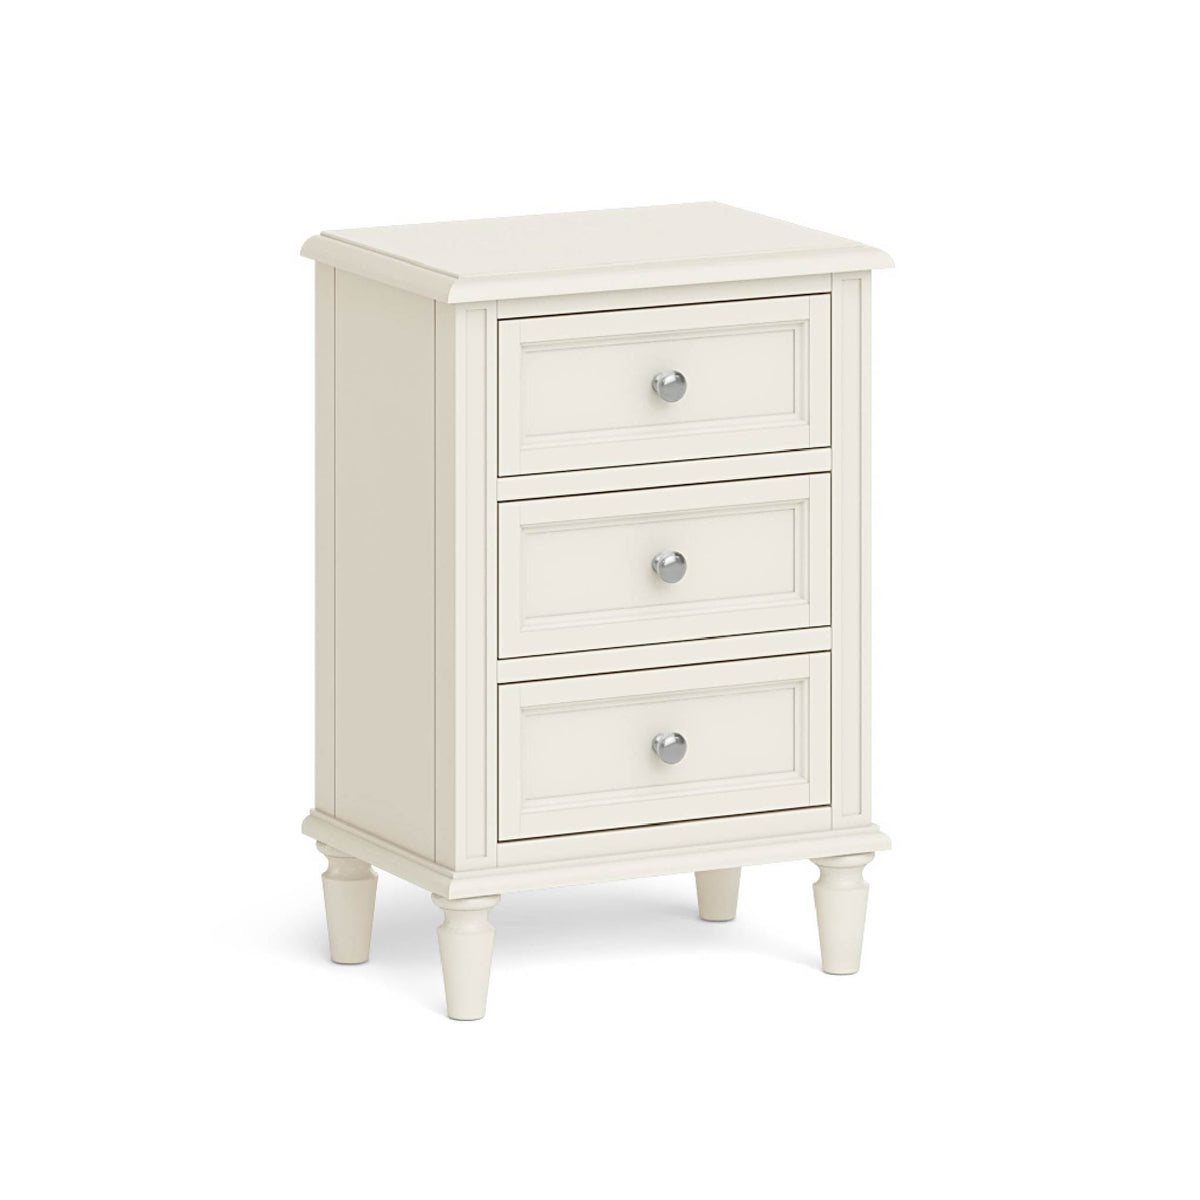 The Mulsanne Cream French Style Bedside Table with 3 Drawers from Roseland Furniture